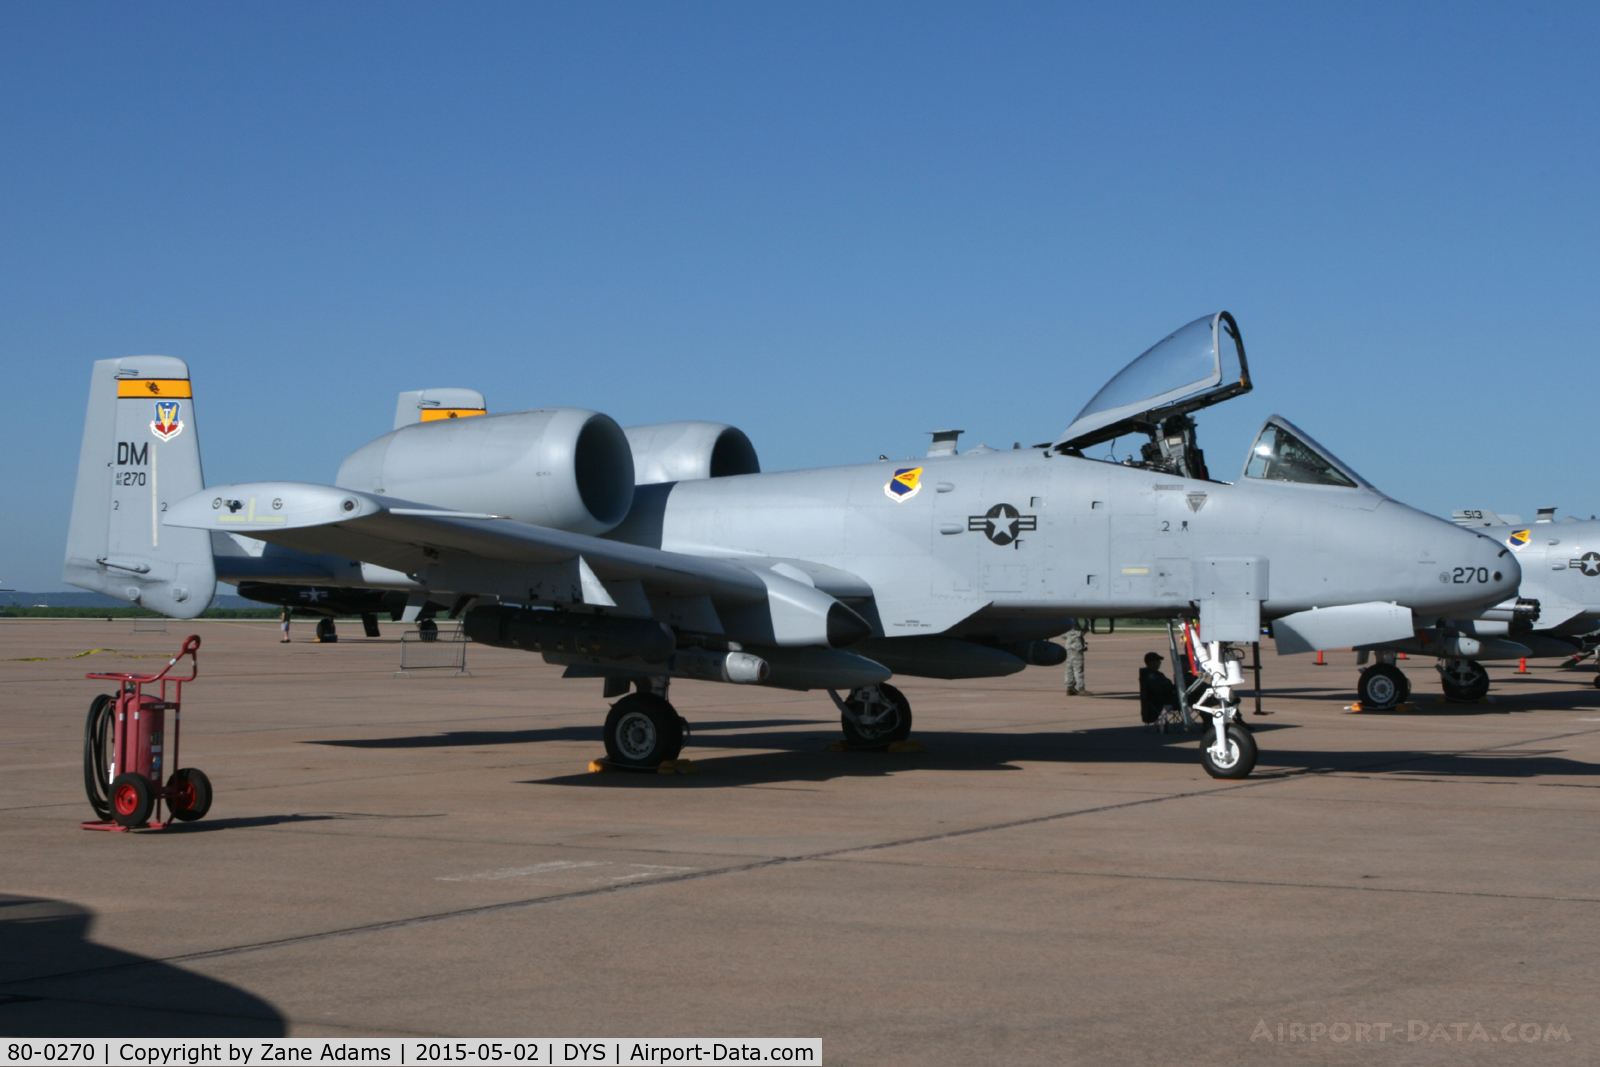 80-0270, 1980 Fairchild Republic A-10C Thunderbolt II C/N A10-0620, At the 2015 Big Country Airshow - Dyess AFB, Texas